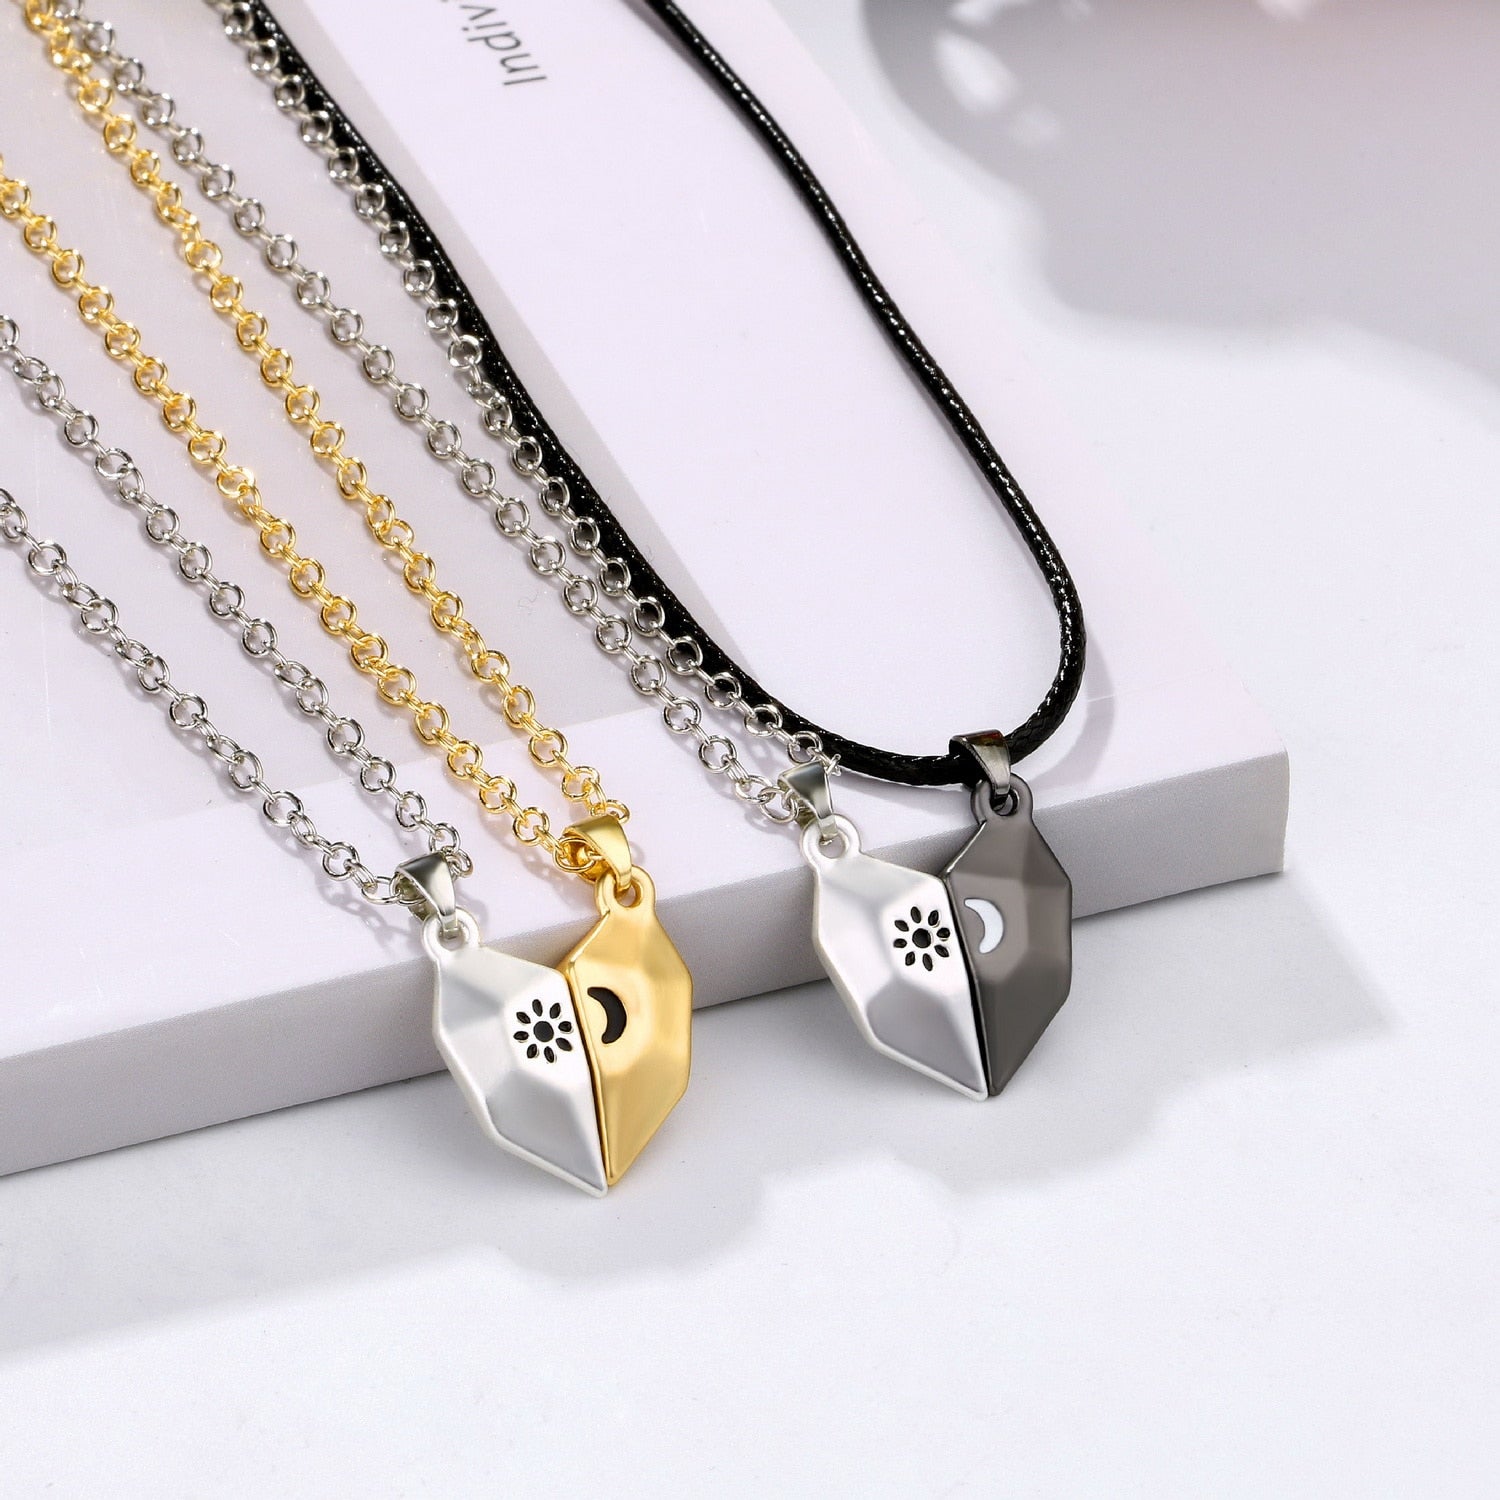 2Pcs/Set Couple Necklace for Women Heart Magnetic Sun Moon Paired Pendant Matching Jewelry Girlfriend Wedding Party Chain Choker